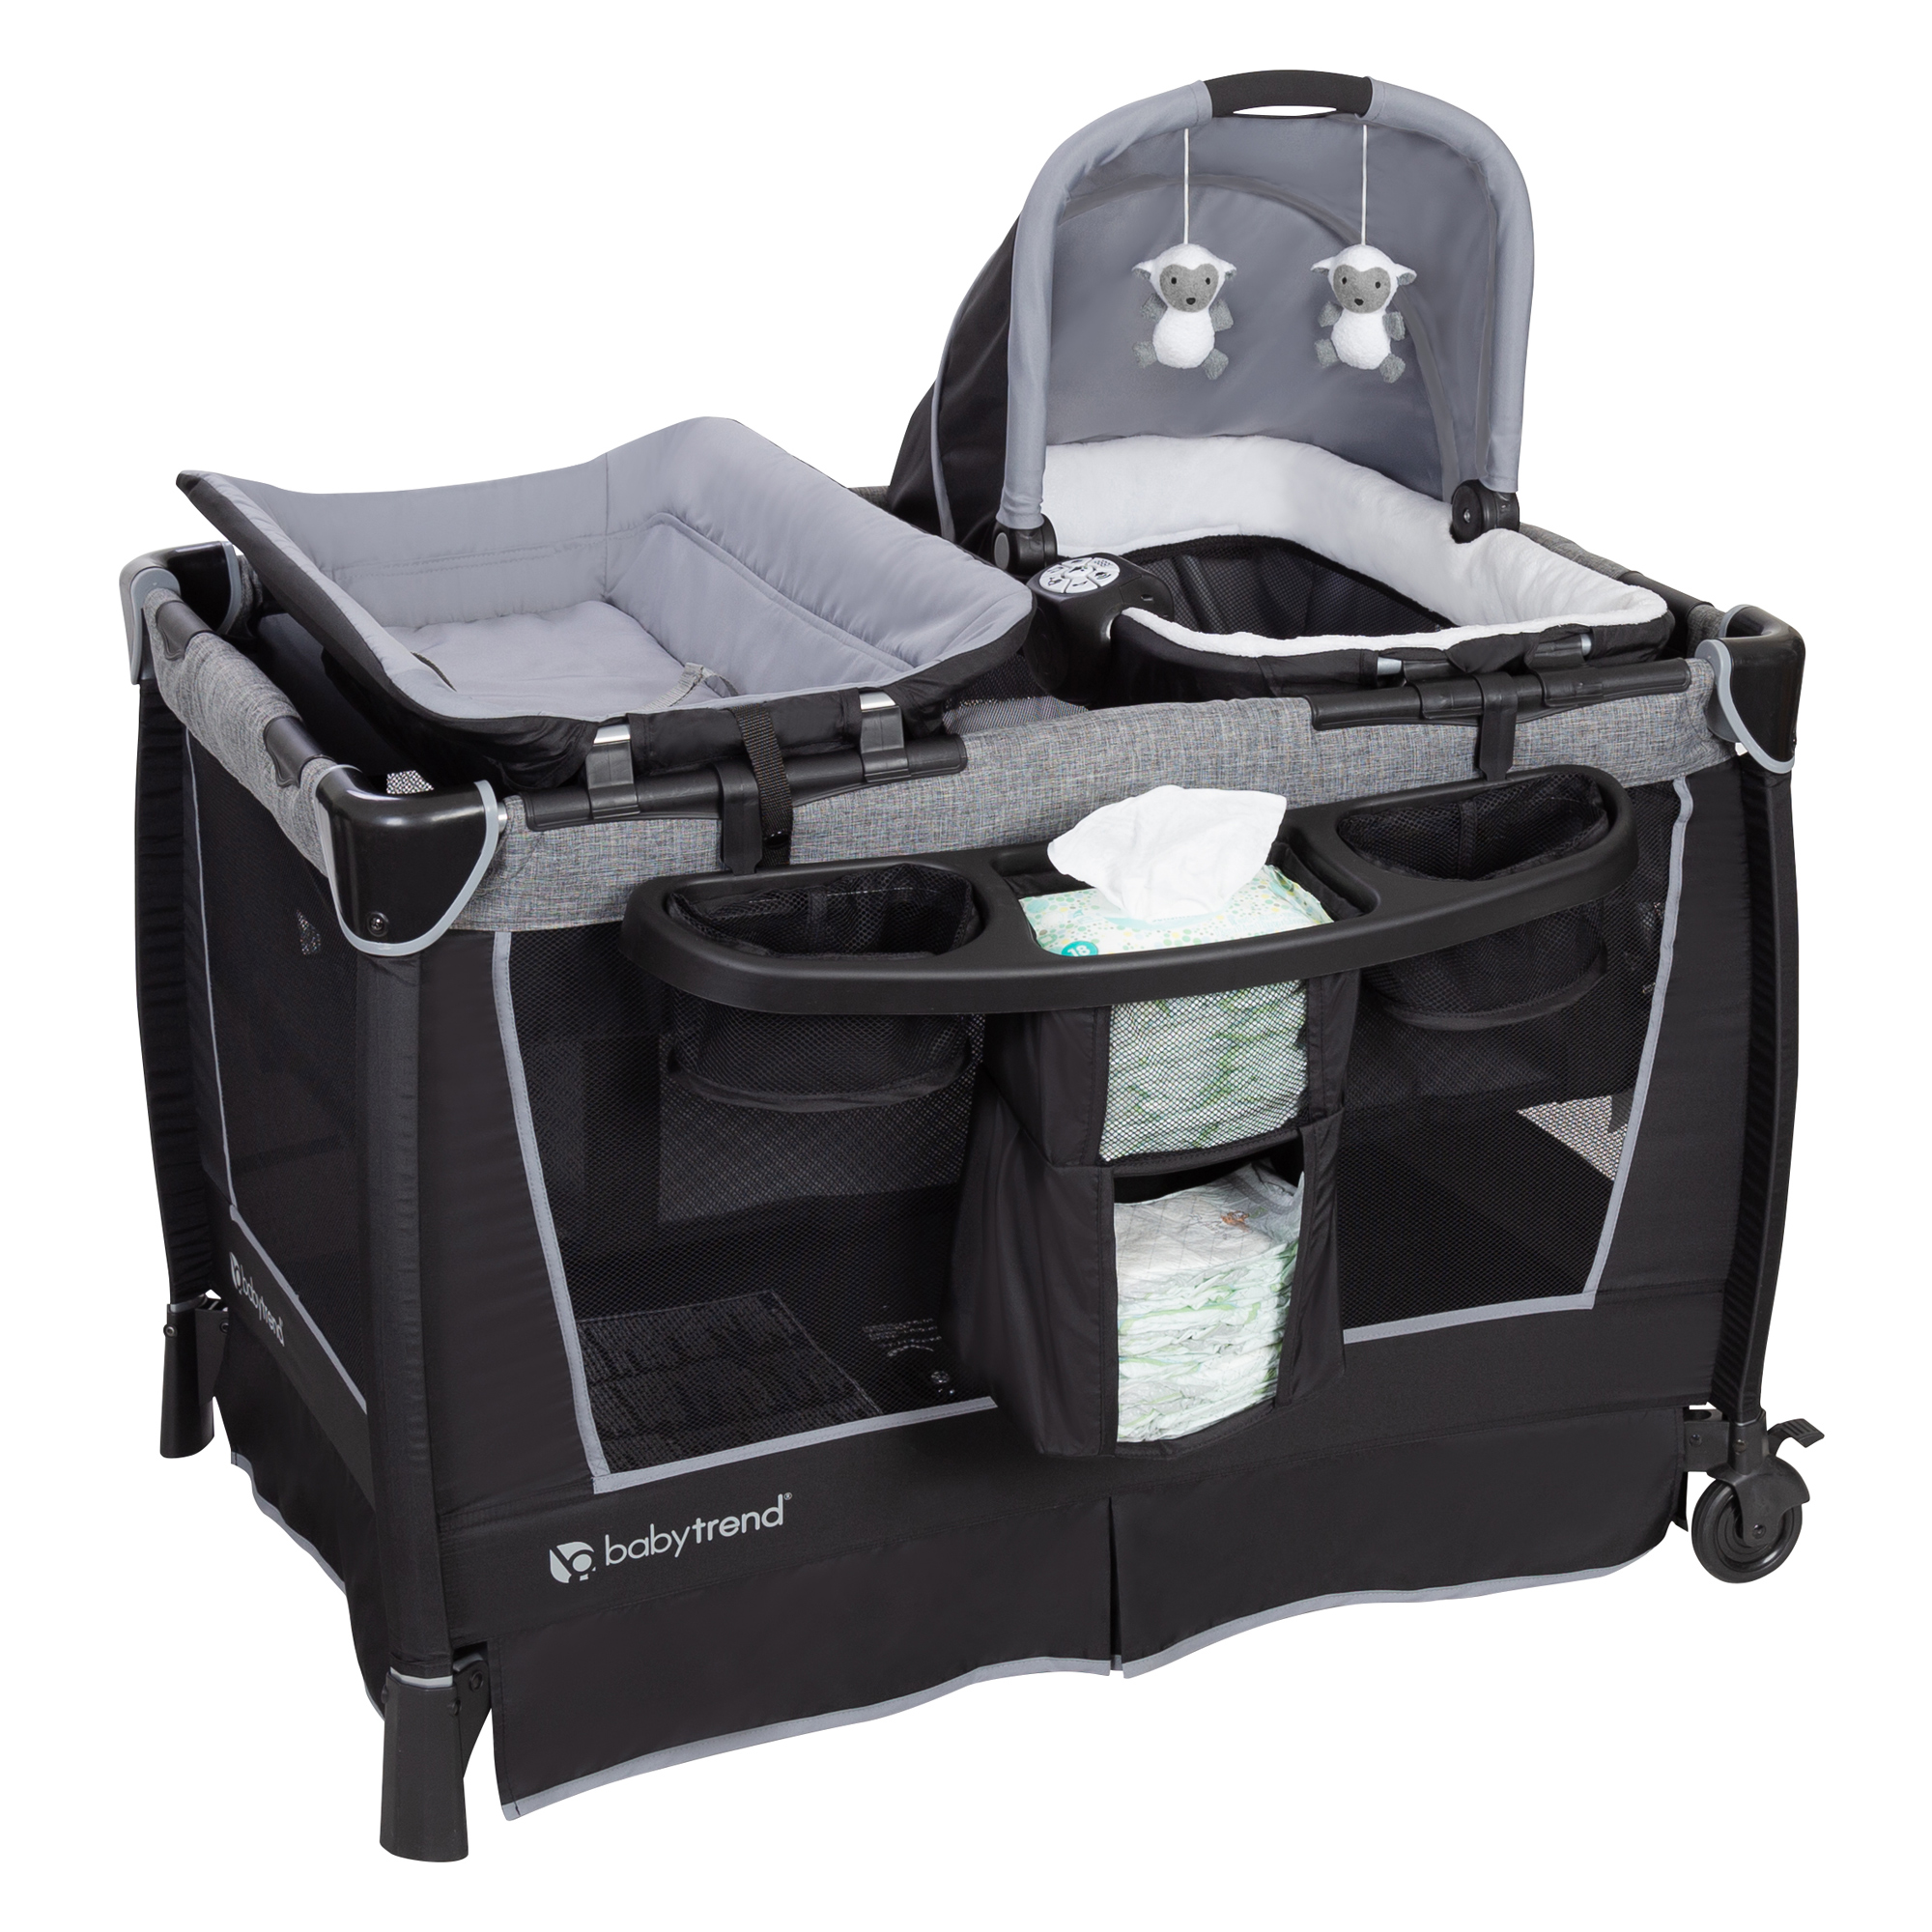 Baby Trend Simply Smart Nursery Center Playard with Bassinet and Travel Bag - Whisper Grey - image 1 of 11